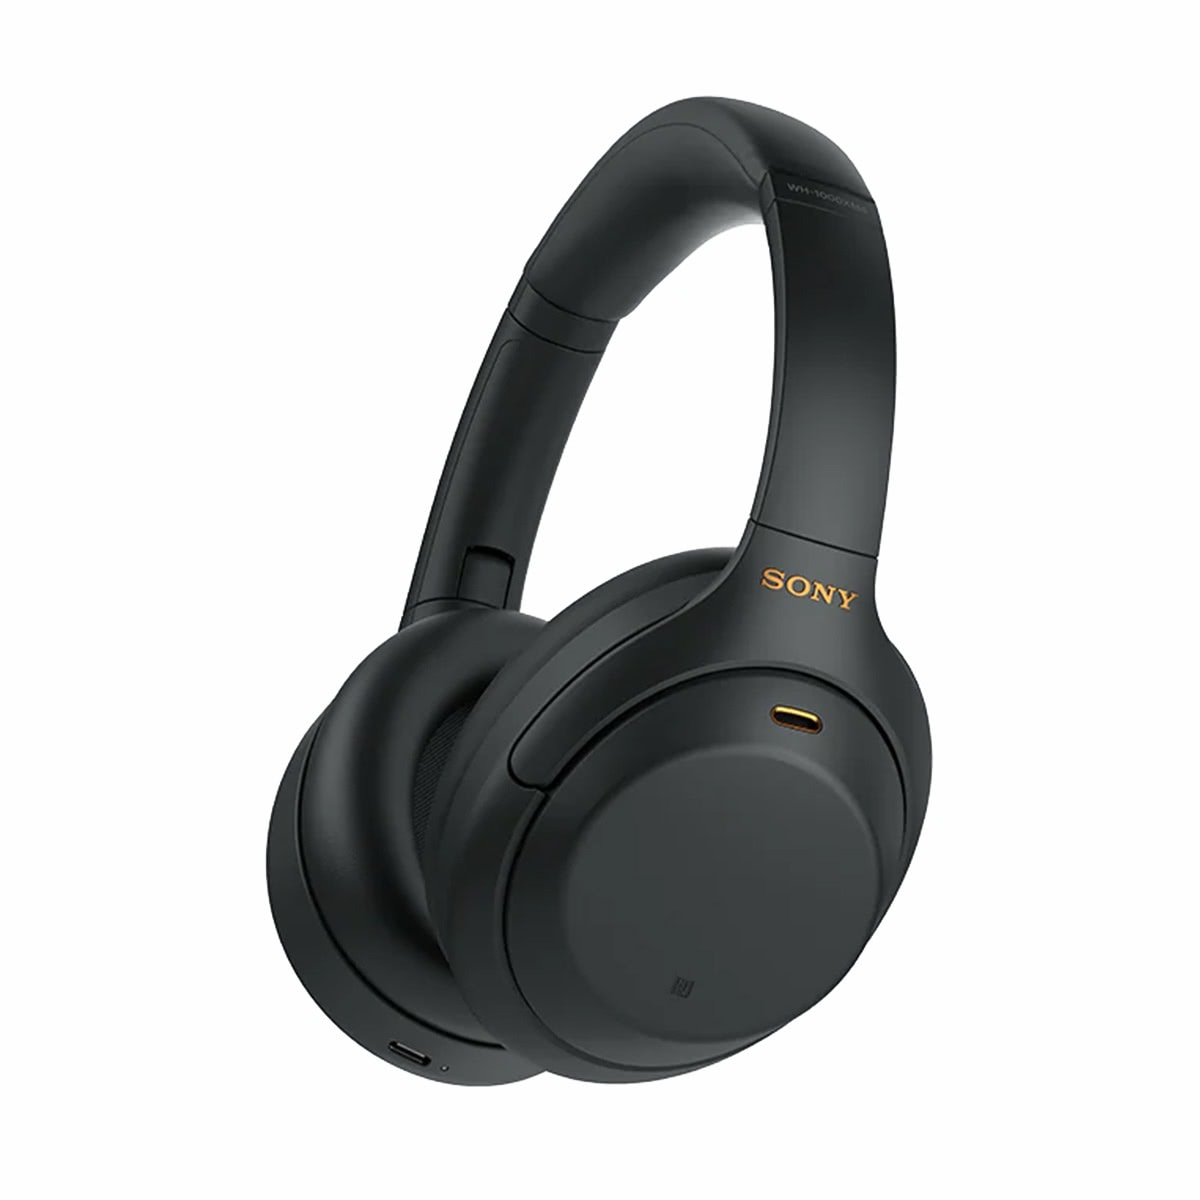 Sony WH-1000XM4 Wireless Noise Canceling Over-the-Ear Headphones with Google Assistant - Black - image 1 of 11